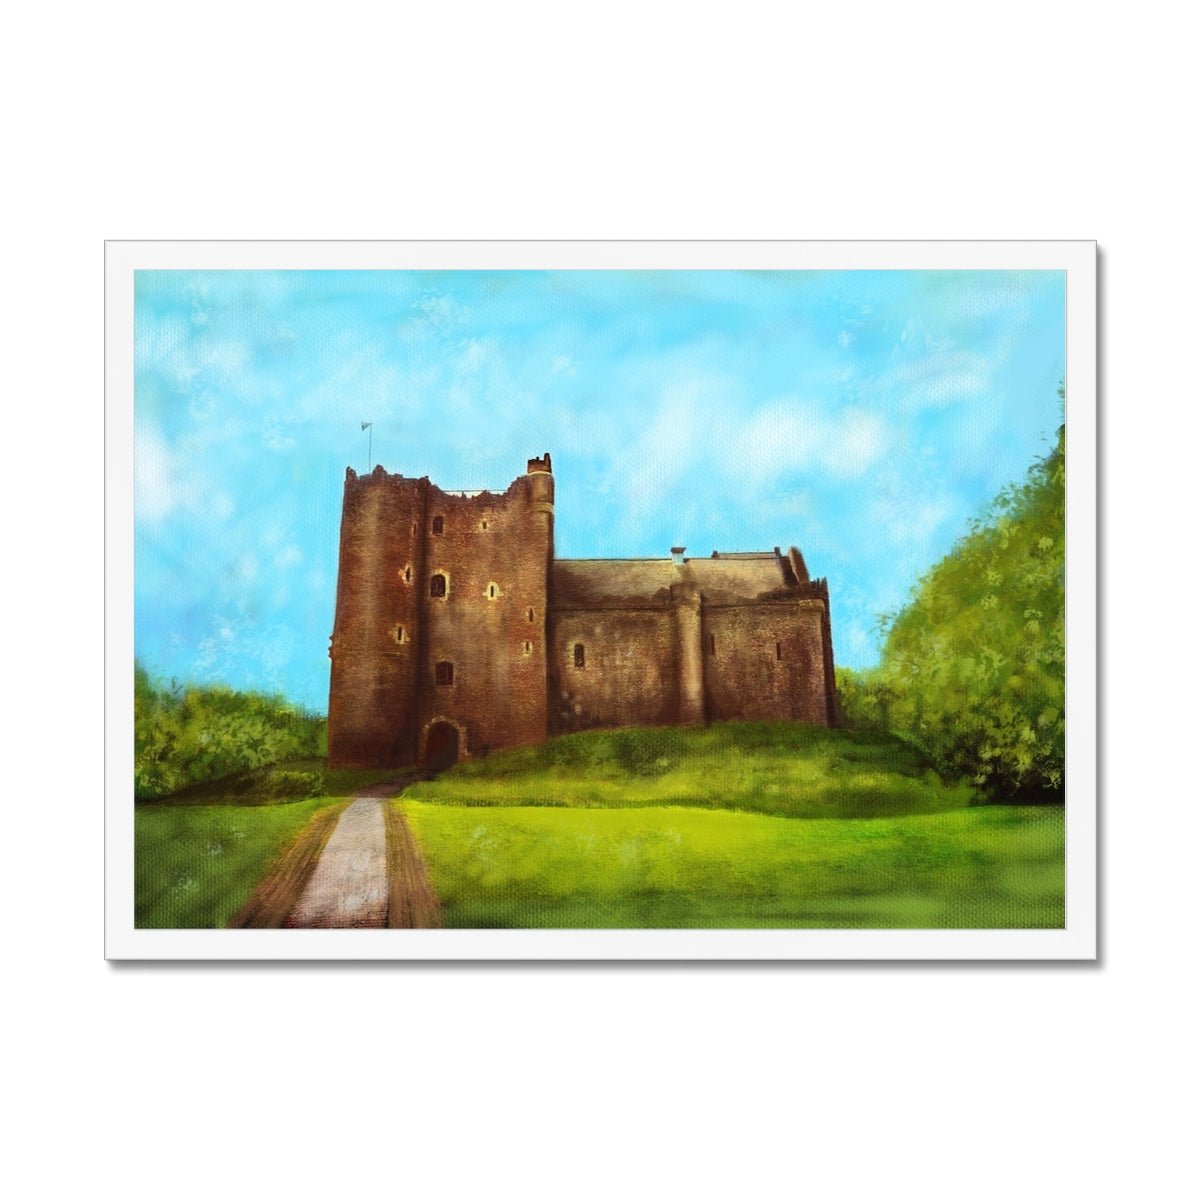 Doune Castle Painting | Framed Prints From Scotland-Framed Prints-Scottish Castles Art Gallery-A2 Landscape-White Frame-Paintings, Prints, Homeware, Art Gifts From Scotland By Scottish Artist Kevin Hunter